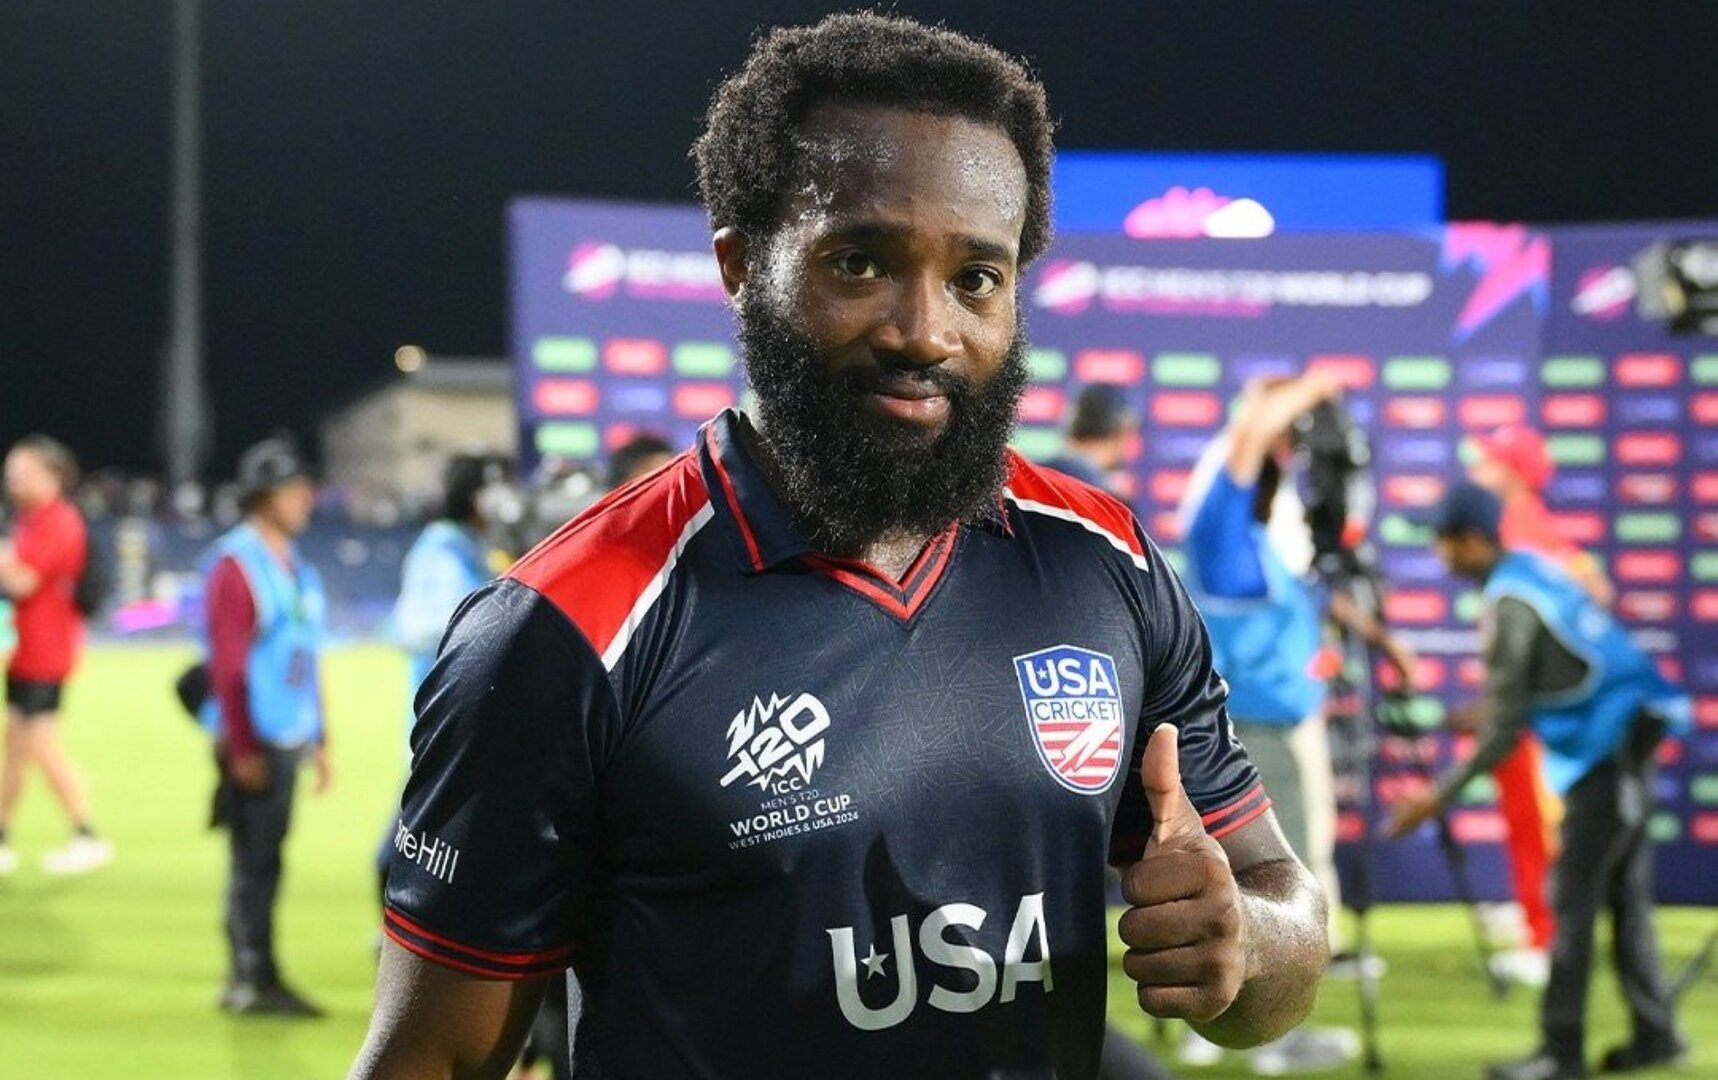 USA vs CAN Aaron Jones enters elusive list with 10 sixes in first